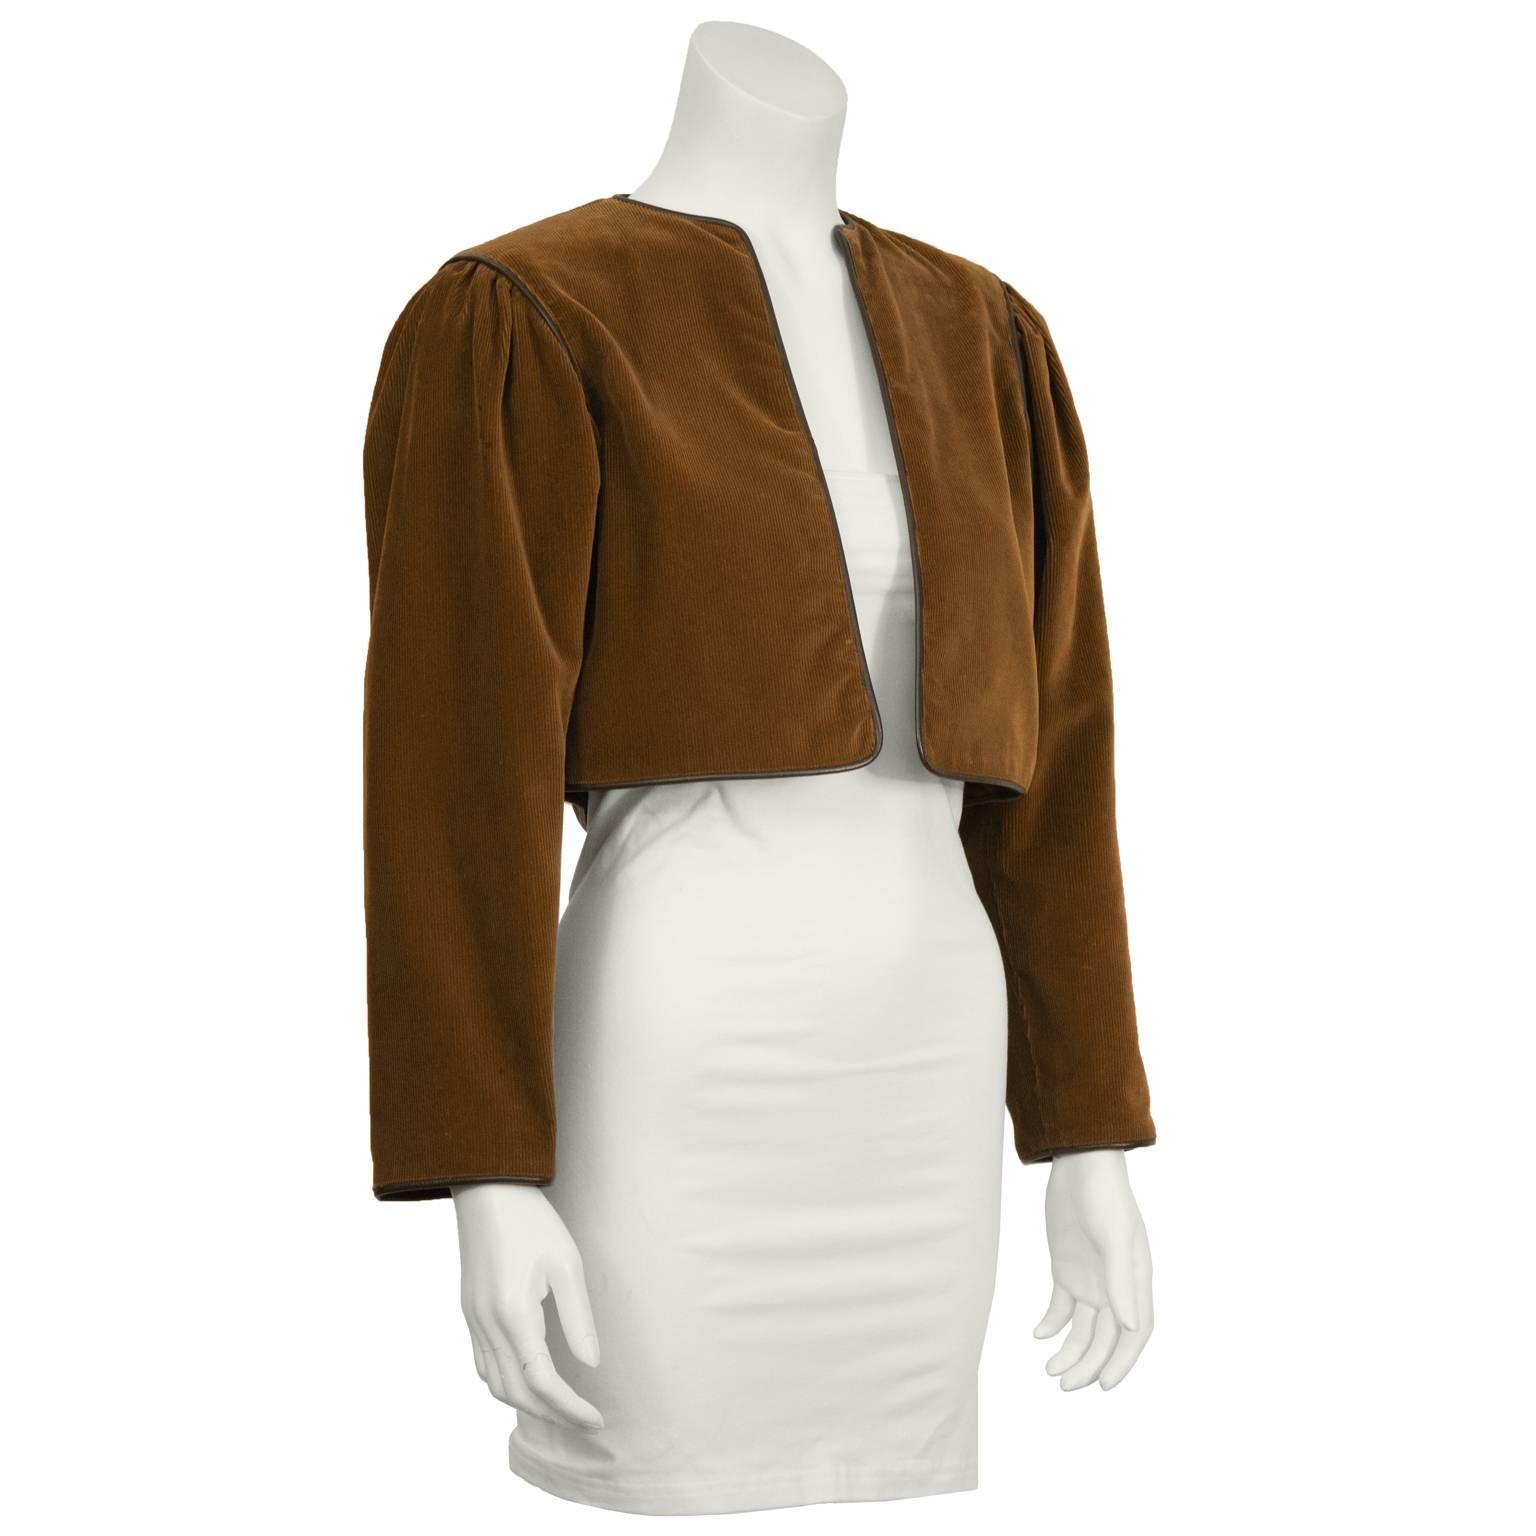 1970's iconic Yves Saint Laurent cropped brown corduroy bolero jacket with dark brown leather piping. Slight gathering at shoulder and lined in brown satin. In excellent condition. Fits like a US size 2-4.